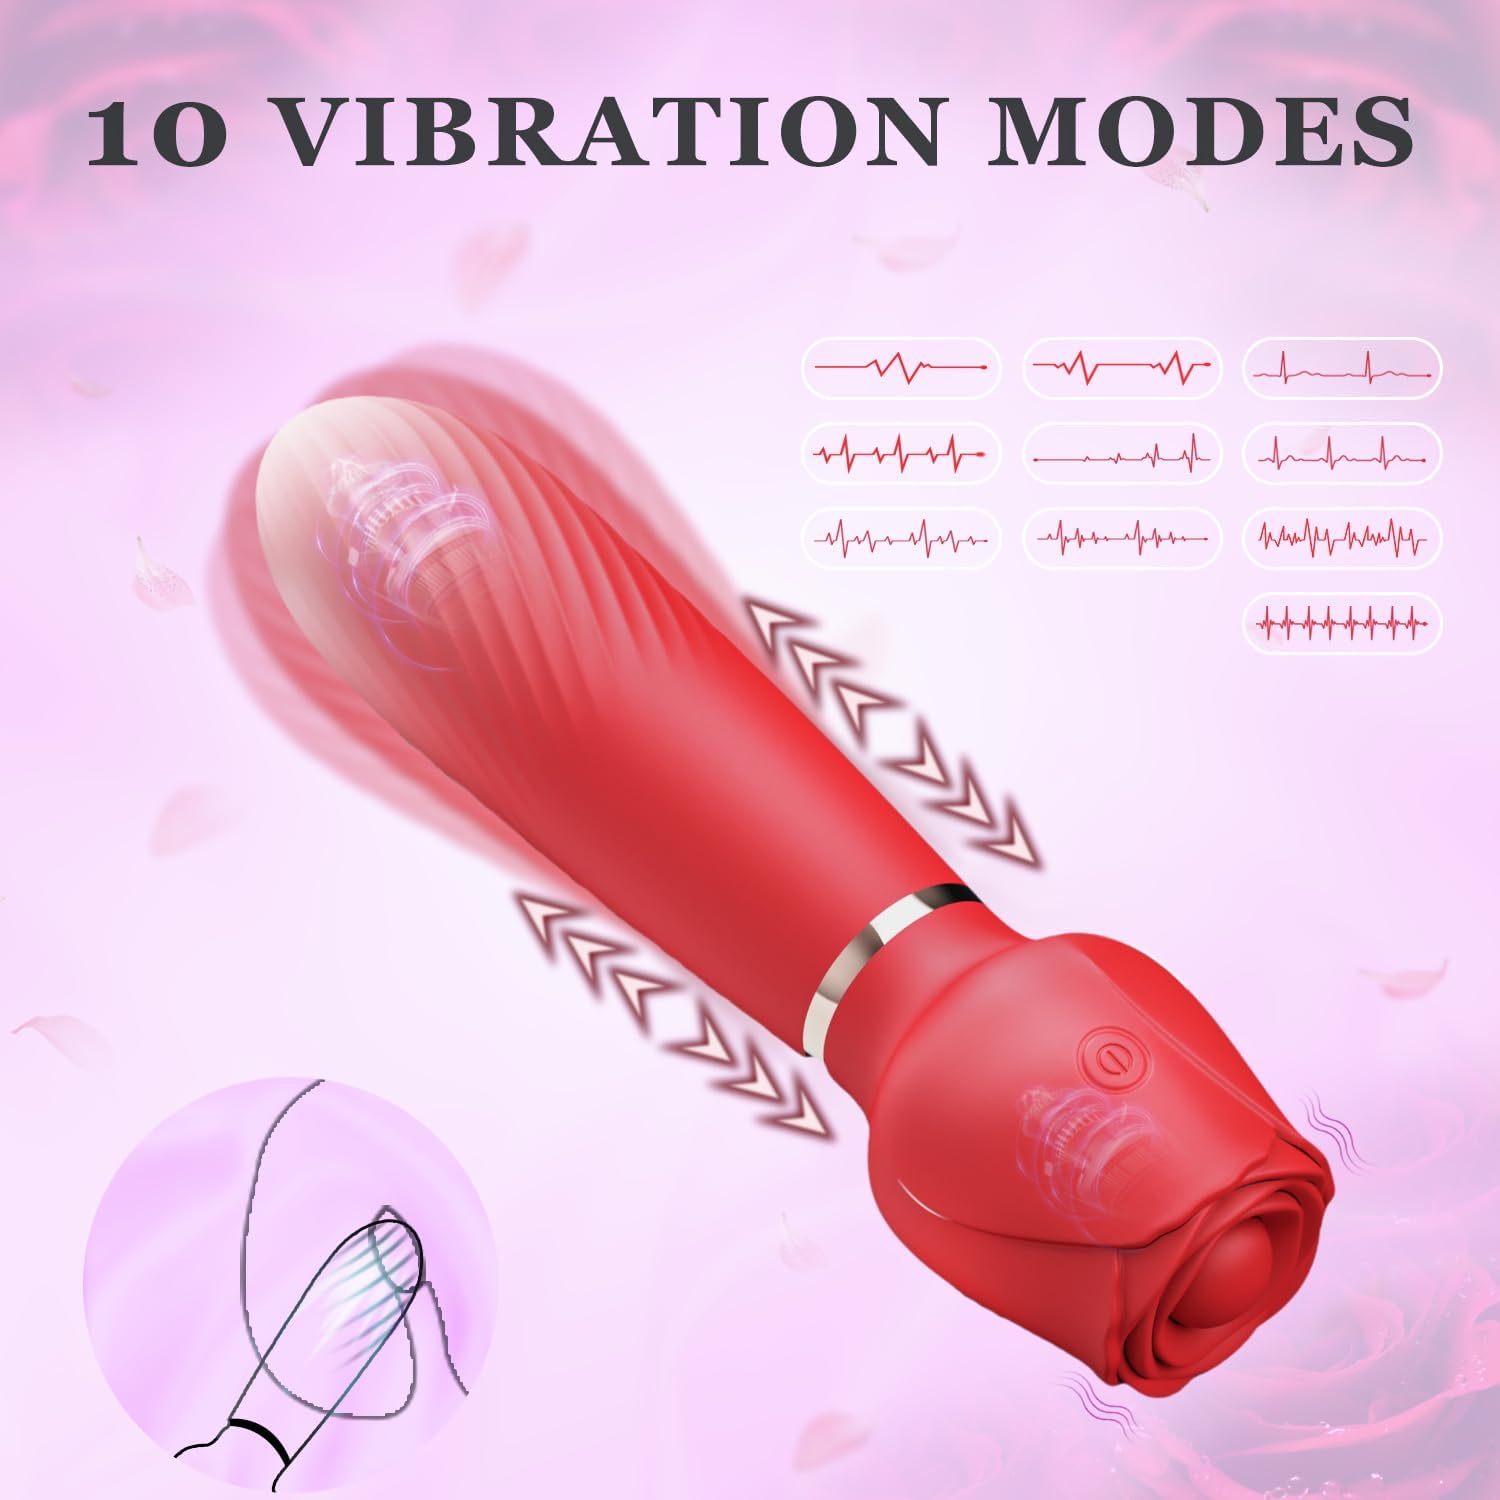 2 in 1 Nipple Toys Adult Sex Toys for Women, G Spot Vibrator Women Sex Toys with 10 Vibration Modes, Portable Size Vibrating Nipple Clamps, Rechargeable & Waterproof Female Sex Toys for Pleasure